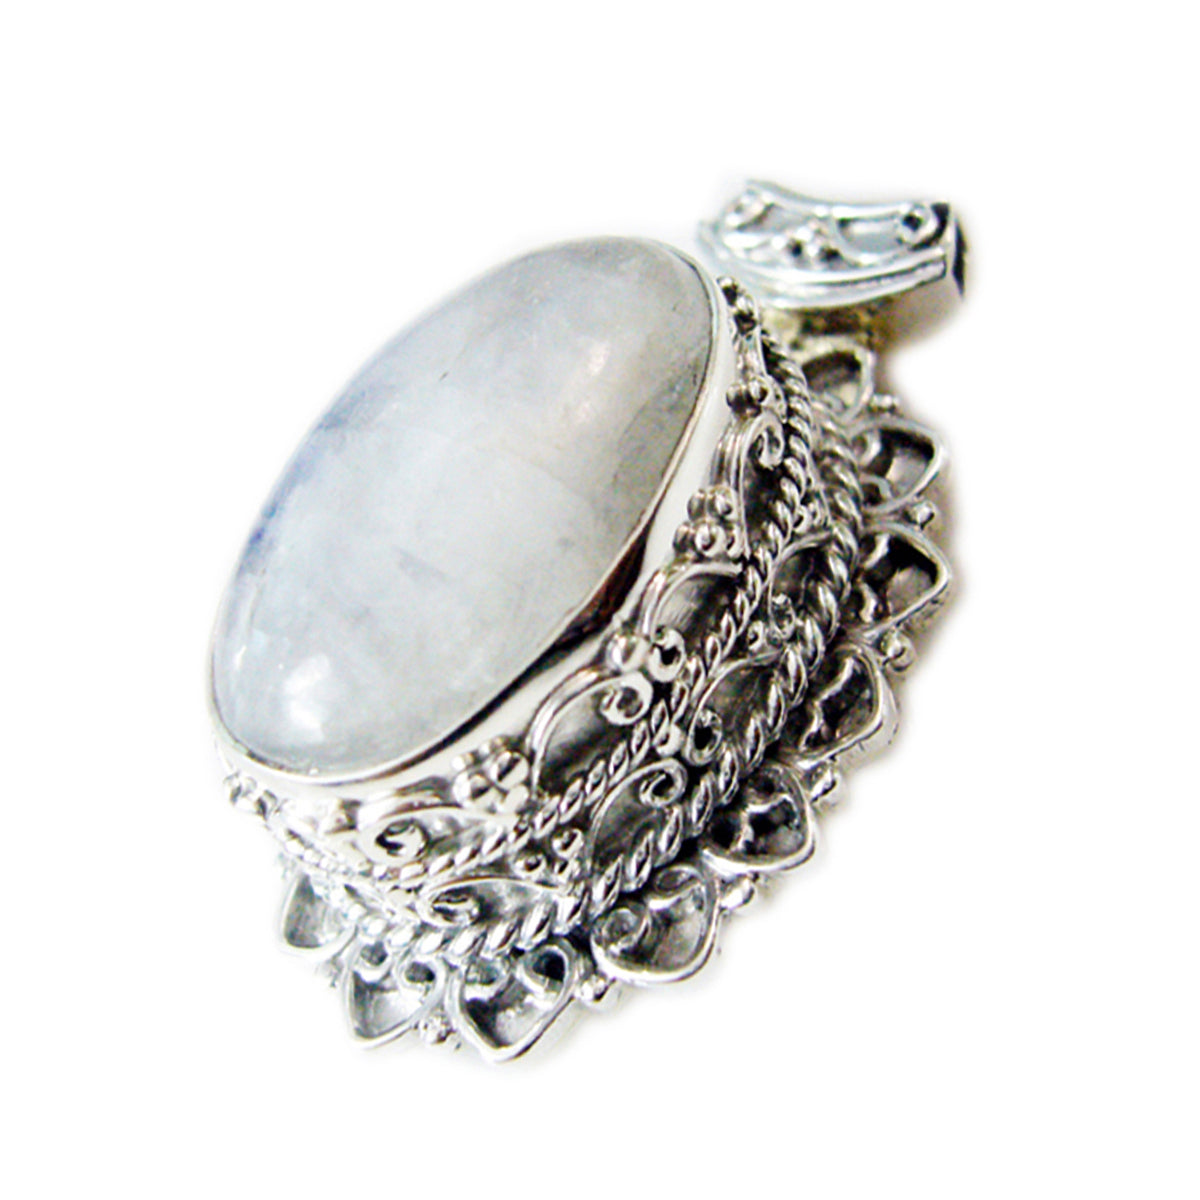 Riyo Beaut Gems Oval Cabochon White Rainbow Moonstone Solid Silver Pendant Gift For Easter Sunday